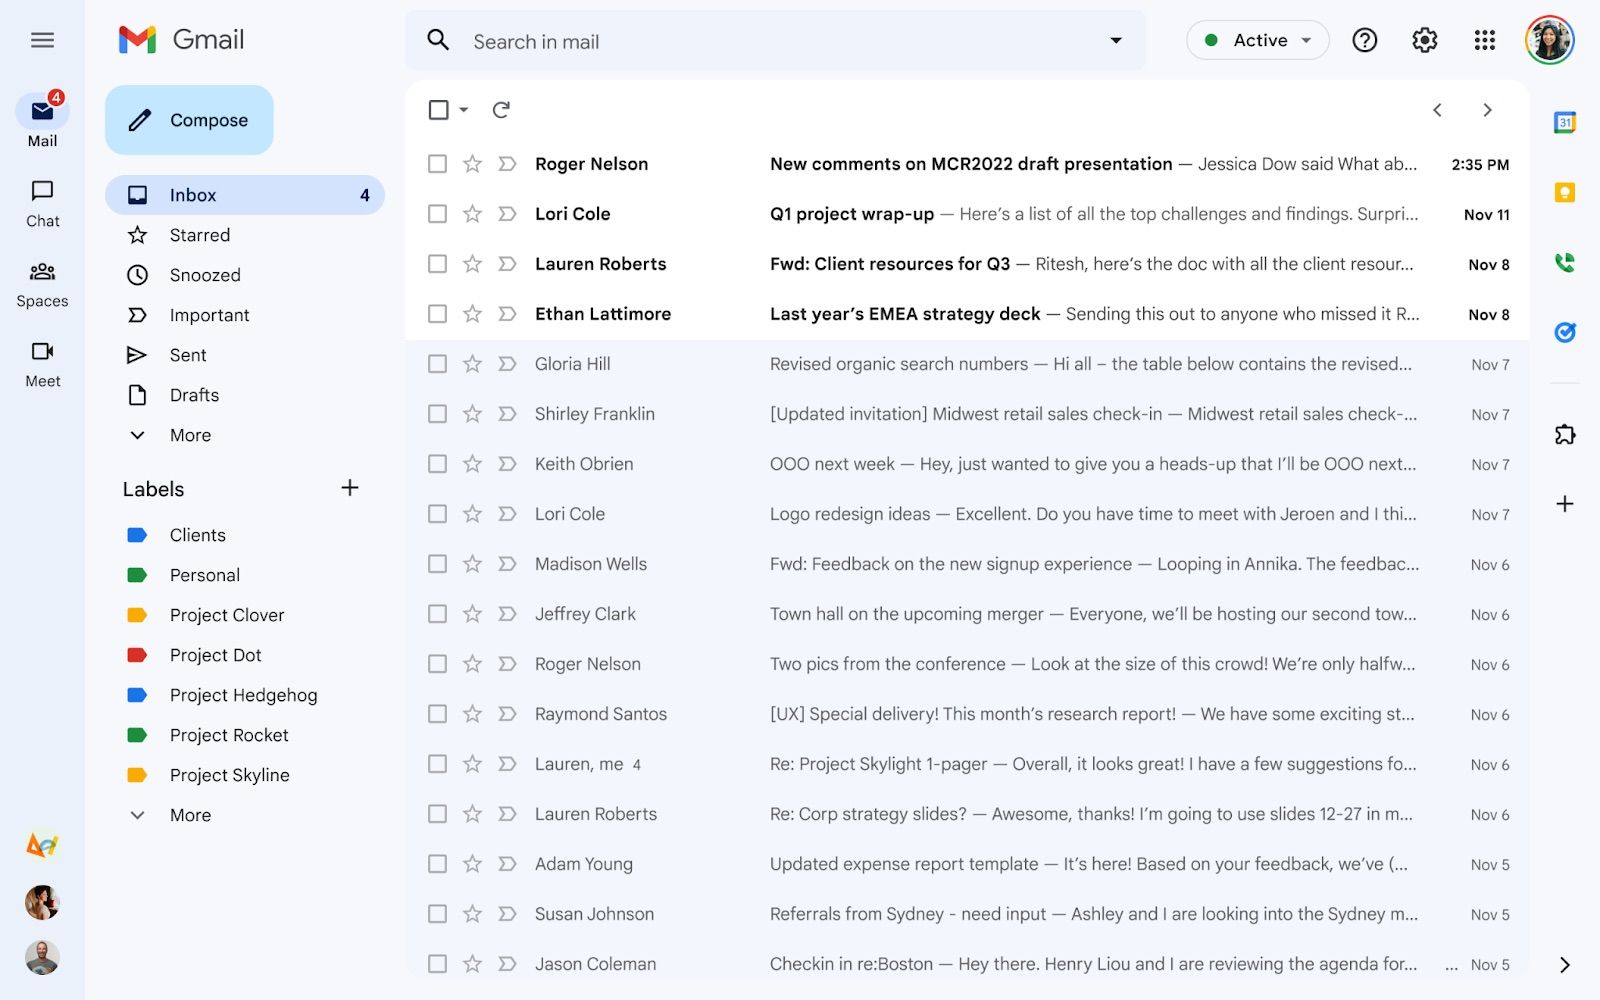 The new layout in a Gmail inbox